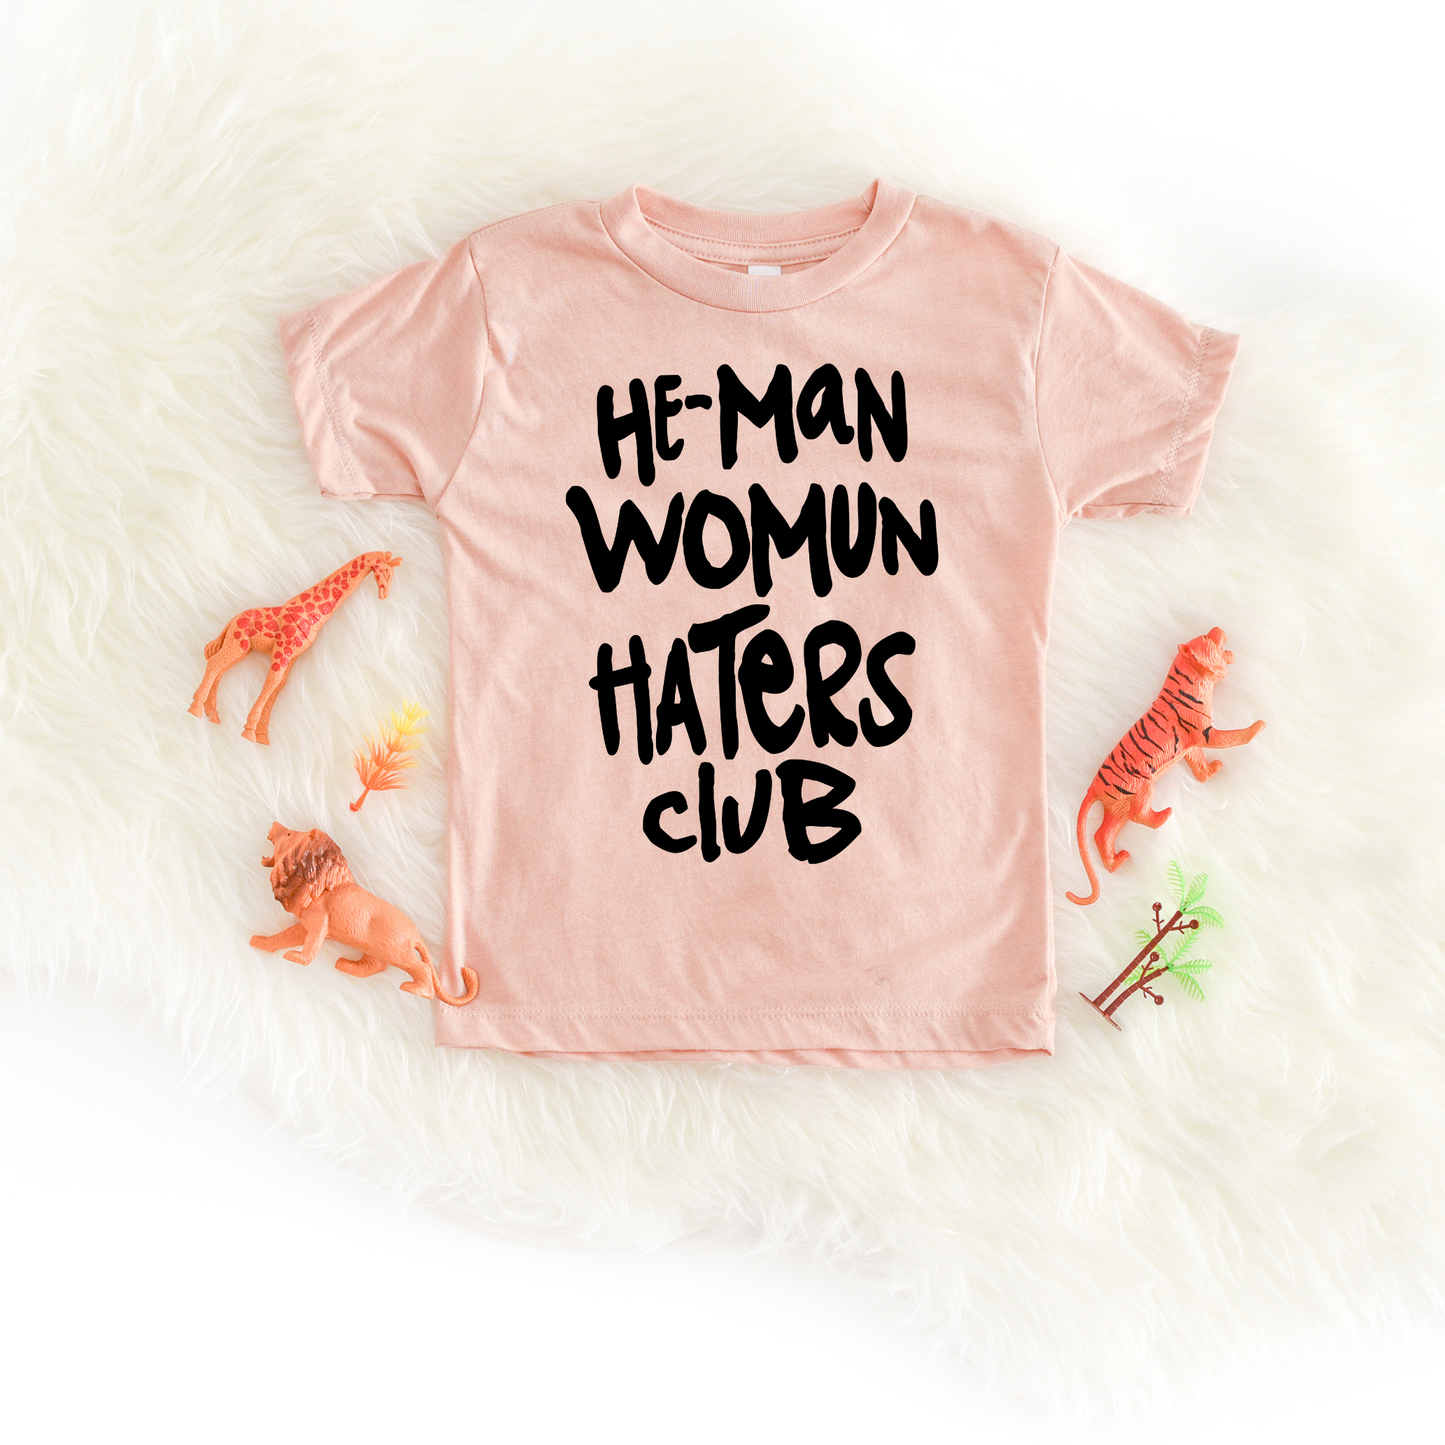 Woman Haters Club Graphic Tee